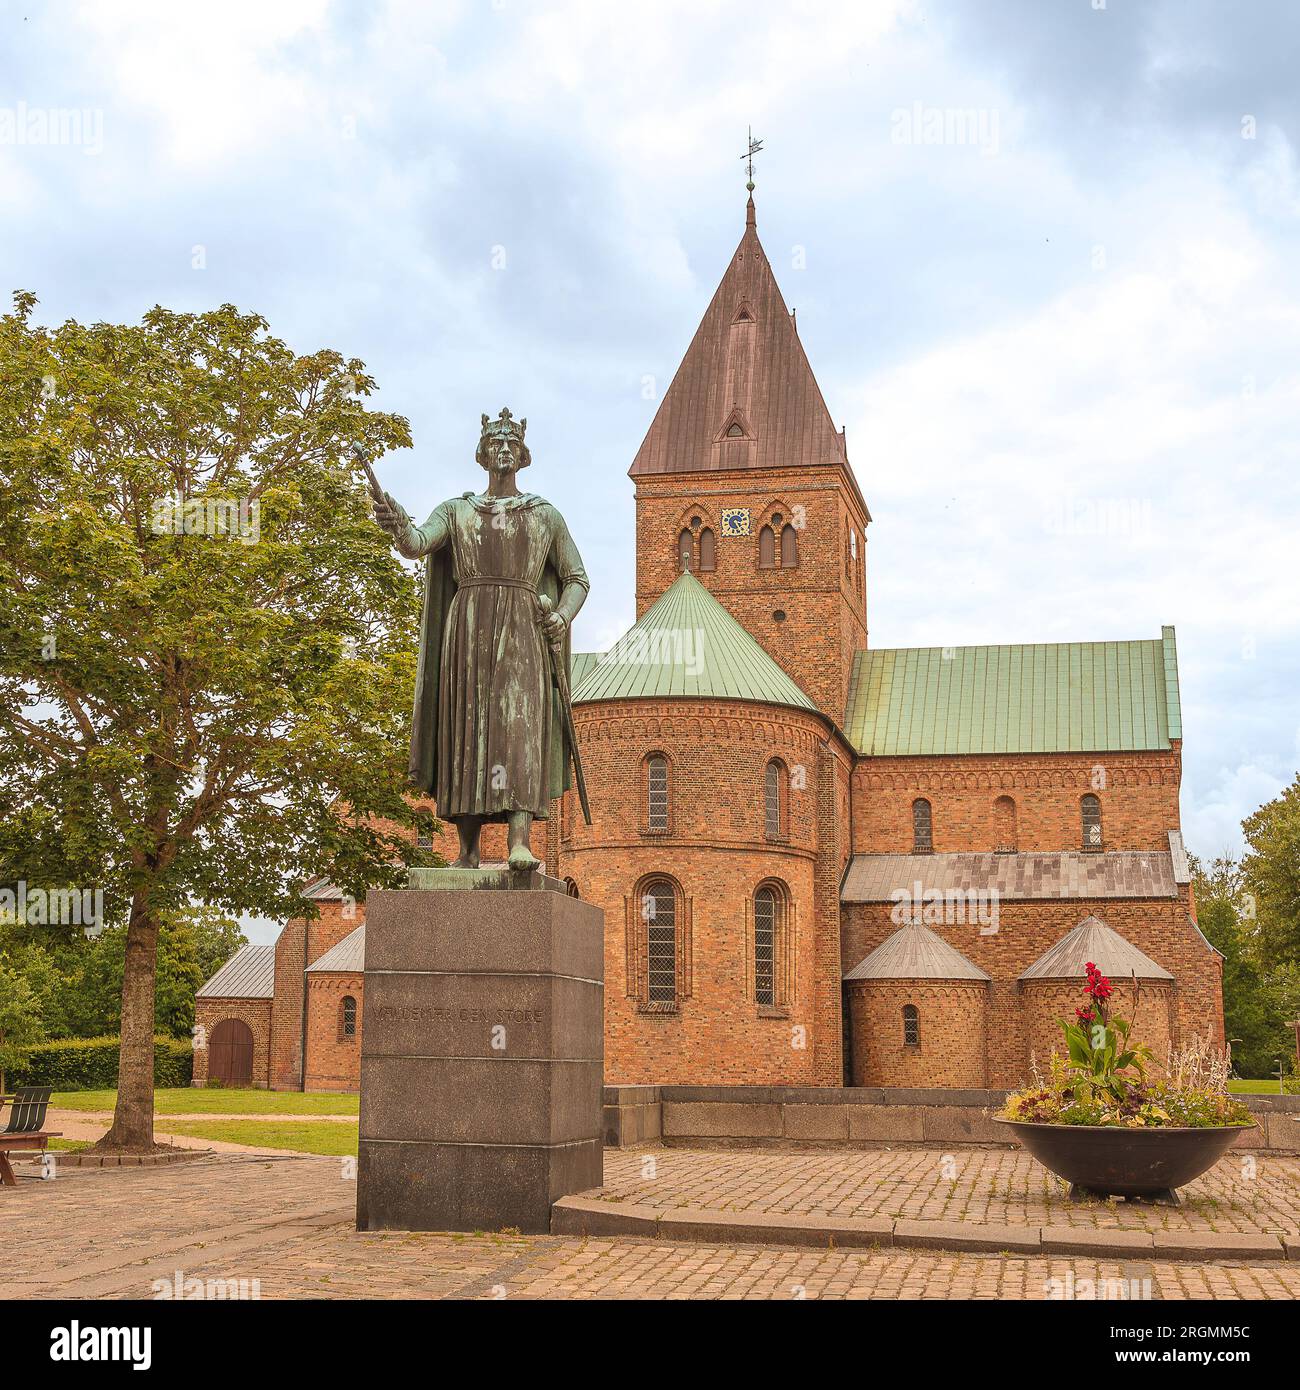 Statue of Valdemar the Great in front of St. Bendt's Church in Ringsted, Denmark, July 29, 2023 Stock Photo